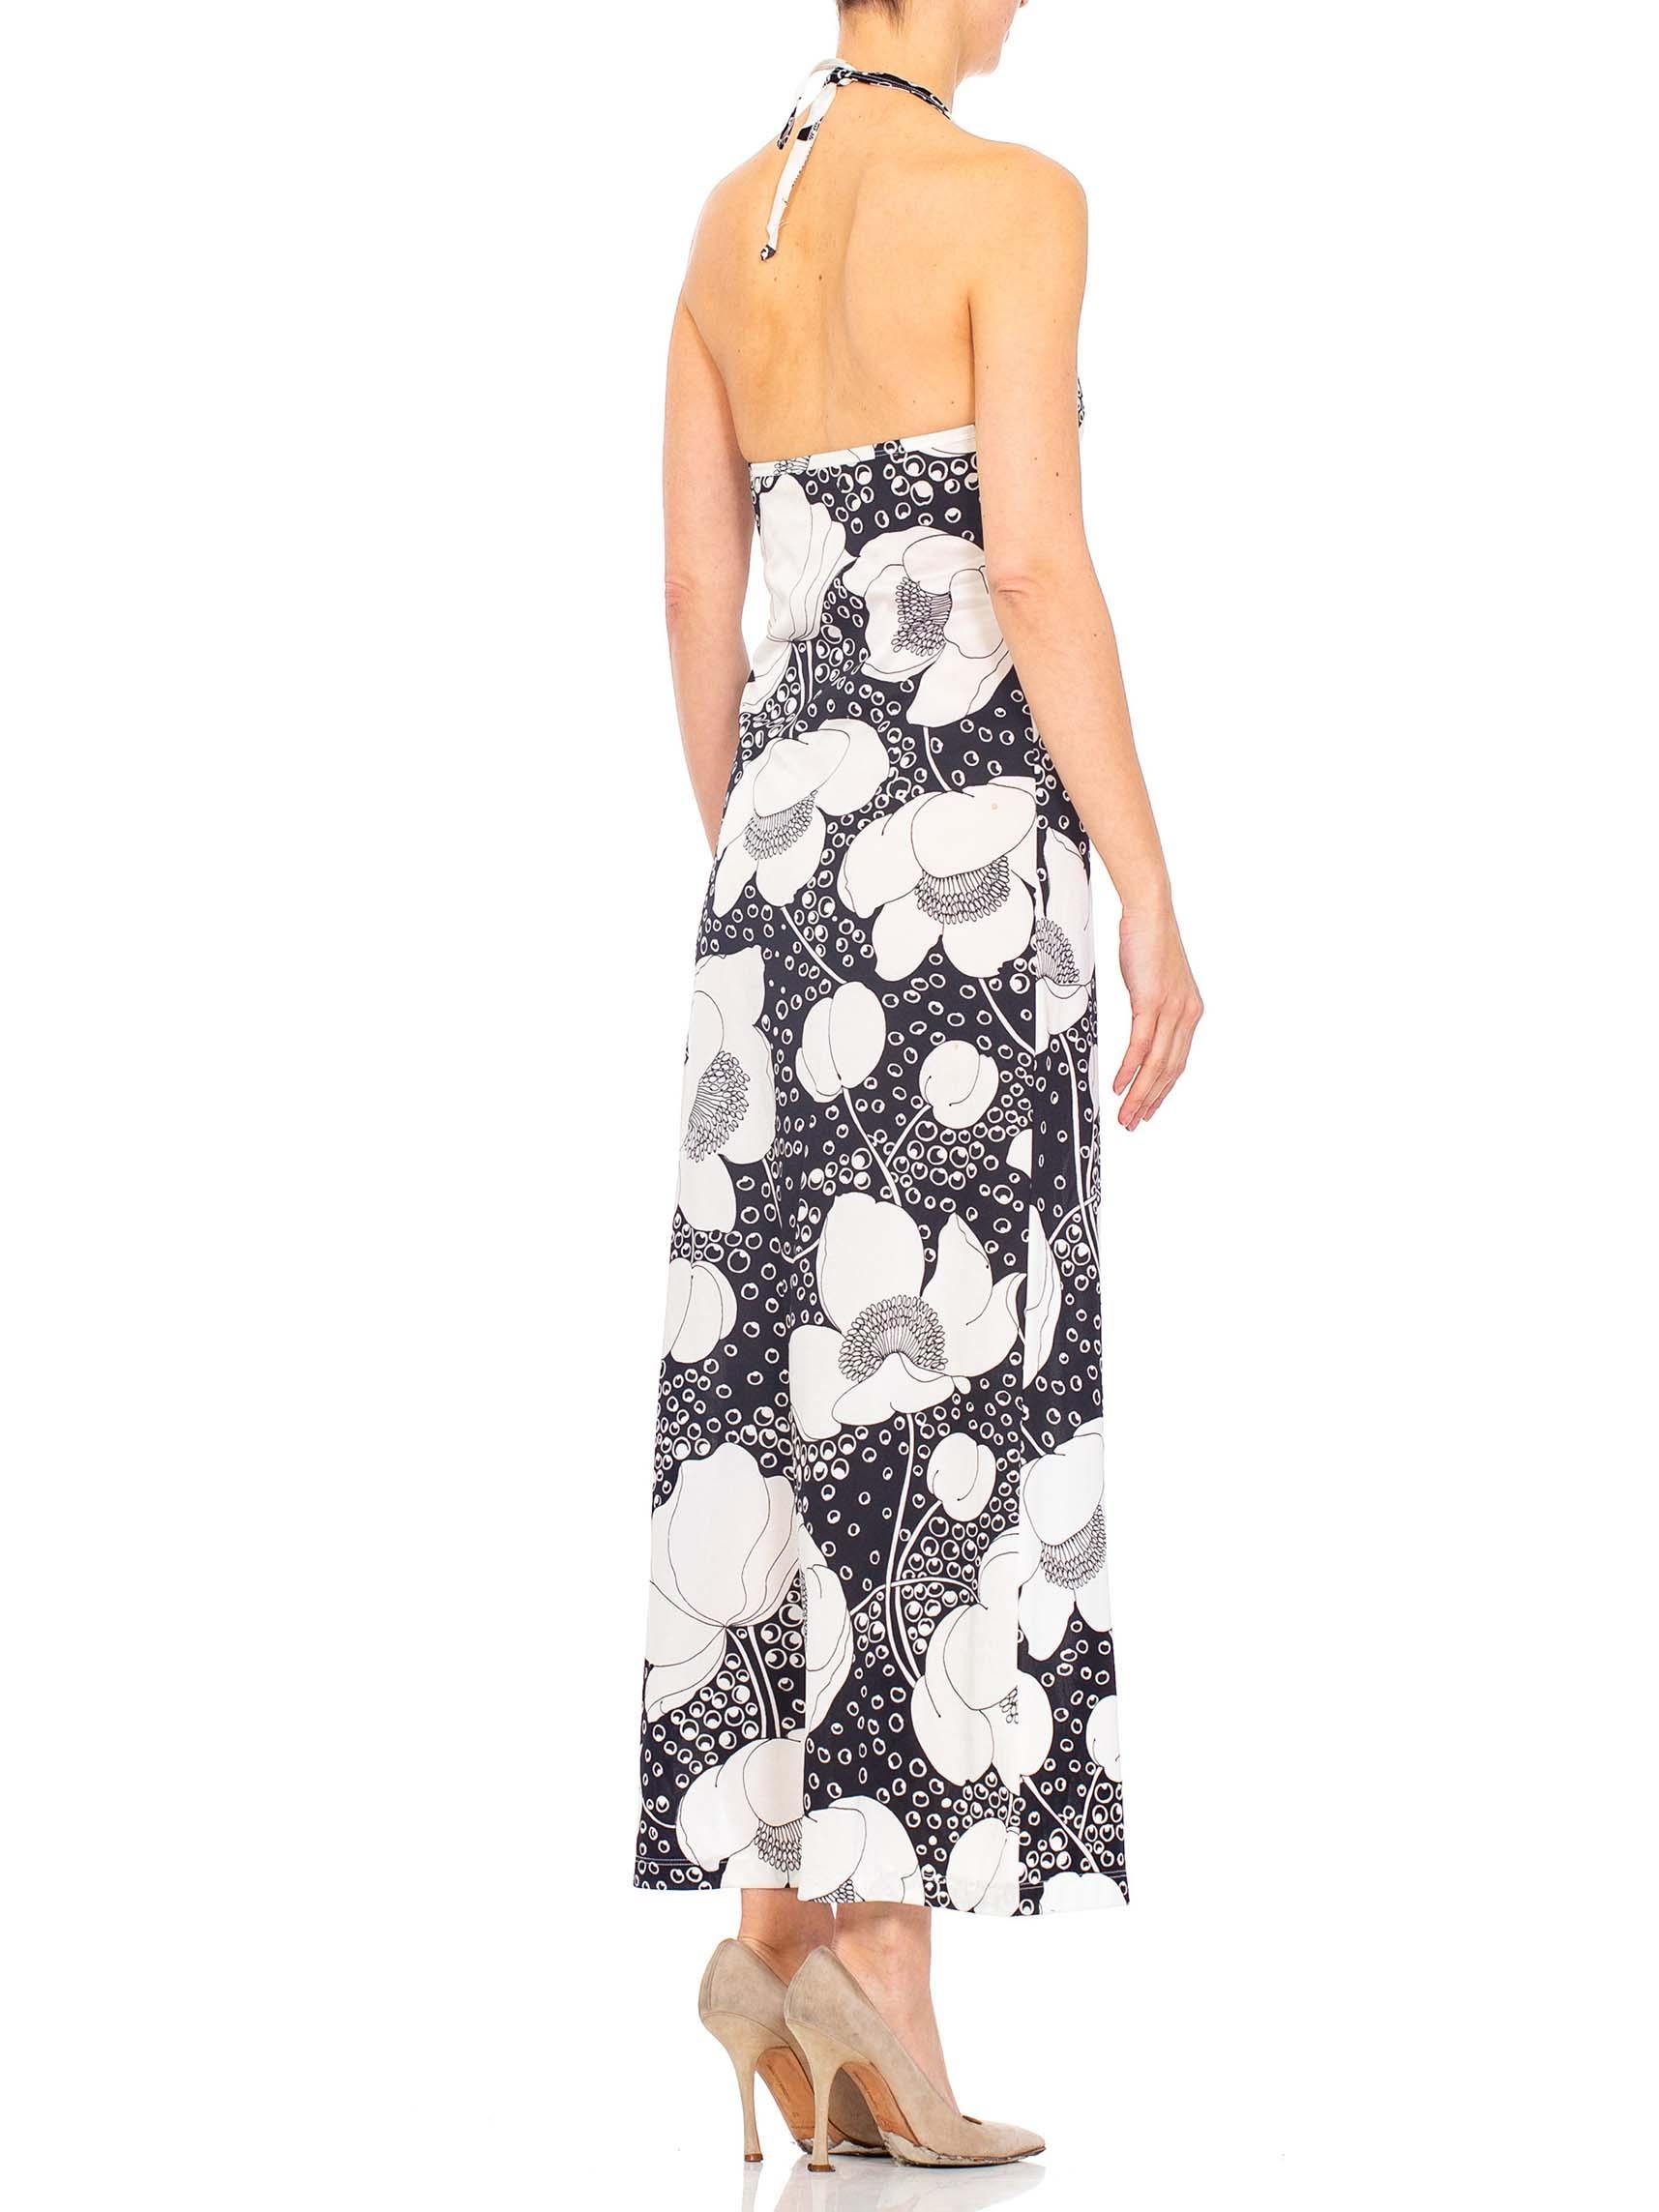 1970'S Black & White Polyester Jersey Floral Print Backless Halter Dress With S 1